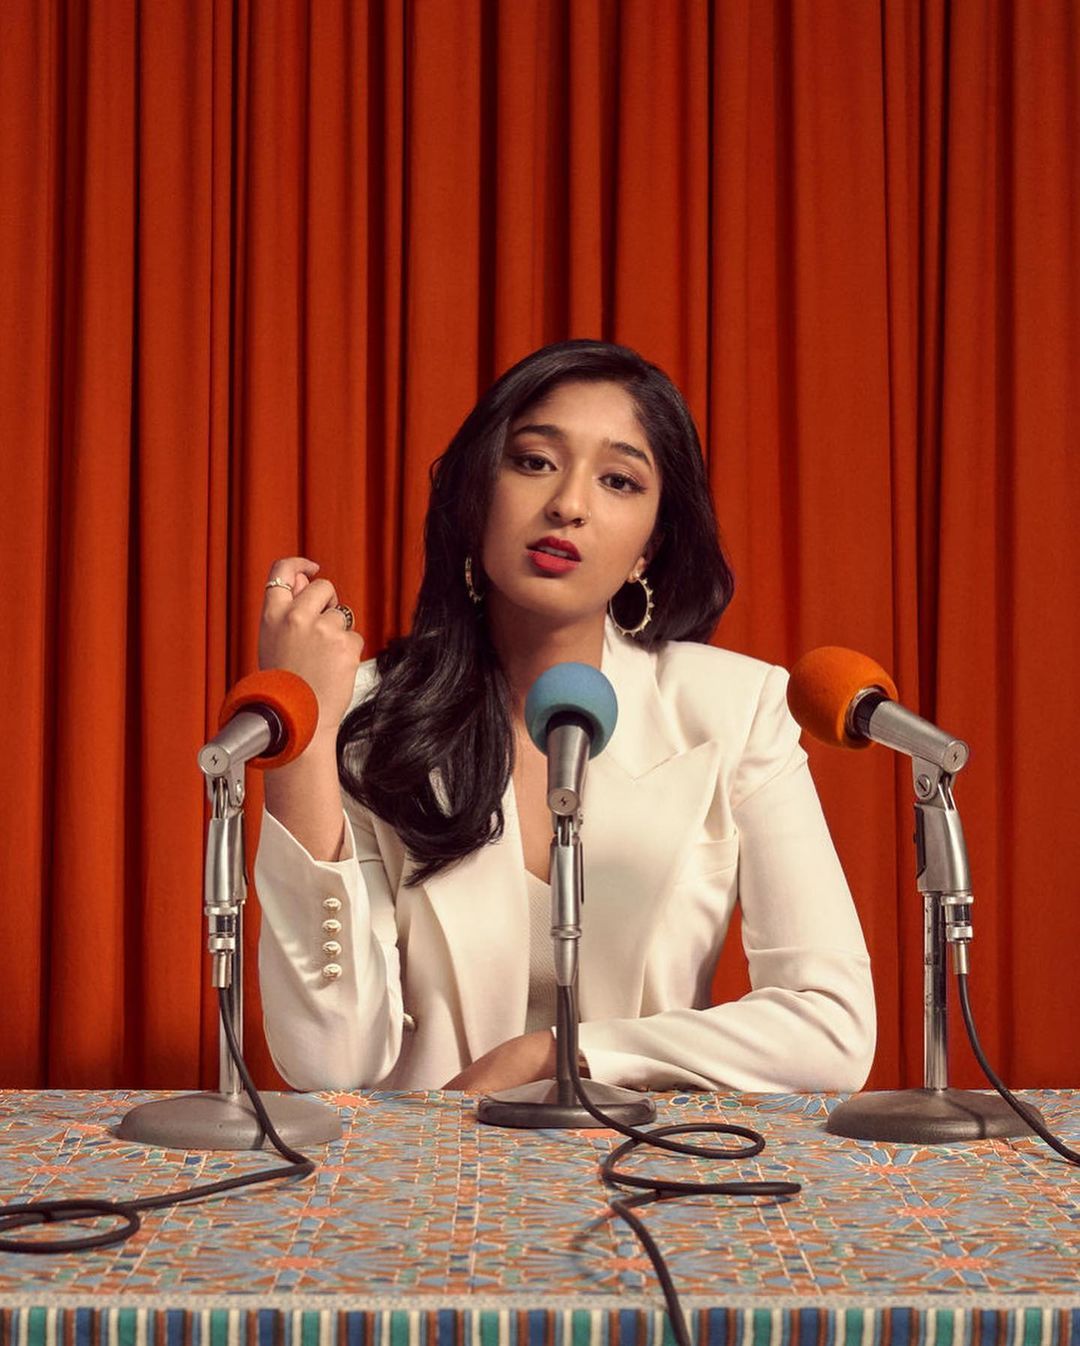 Picture of Indian woman wearing white suit with 3 microphones pointed towards her.